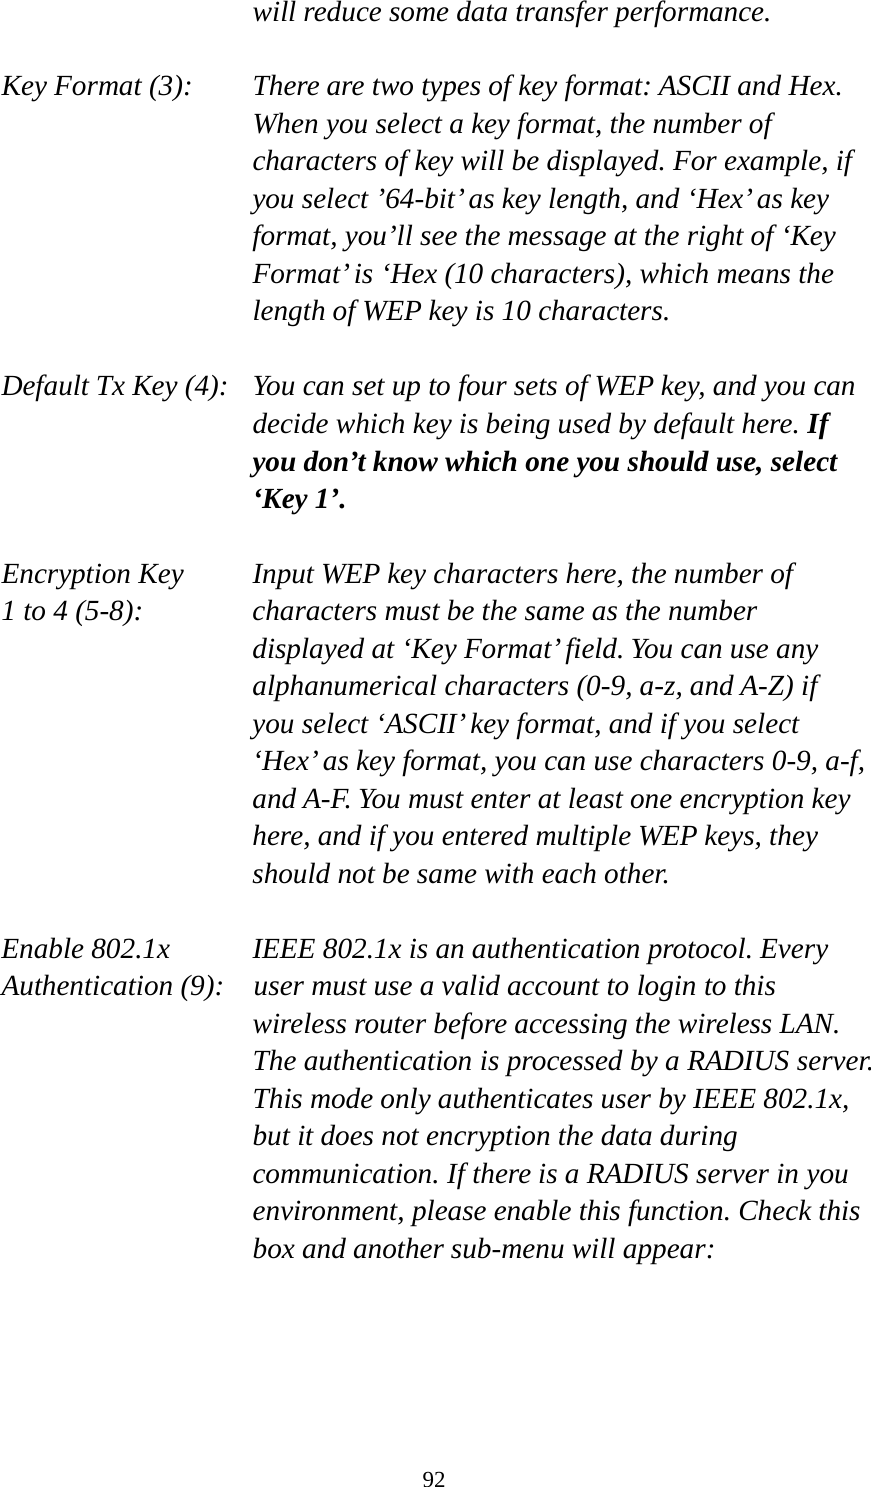 92 will reduce some data transfer performance.  Key Format (3):   There are two types of key format: ASCII and Hex. When you select a key format, the number of characters of key will be displayed. For example, if you select ’64-bit’ as key length, and ‘Hex’ as key format, you’ll see the message at the right of ‘Key Format’ is ‘Hex (10 characters), which means the length of WEP key is 10 characters.  Default Tx Key (4):   You can set up to four sets of WEP key, and you can decide which key is being used by default here. If you don’t know which one you should use, select ‘Key 1’.  Encryption Key     Input WEP key characters here, the number of 1 to 4 (5-8):    characters must be the same as the number displayed at ‘Key Format’ field. You can use any alphanumerical characters (0-9, a-z, and A-Z) if you select ‘ASCII’ key format, and if you select ‘Hex’ as key format, you can use characters 0-9, a-f, and A-F. You must enter at least one encryption key here, and if you entered multiple WEP keys, they should not be same with each other.  Enable 802.1x IEEE 802.1x is an authentication protocol. Every   Authentication (9):  user must use a valid account to login to this wireless router before accessing the wireless LAN. The authentication is processed by a RADIUS server. This mode only authenticates user by IEEE 802.1x, but it does not encryption the data during communication. If there is a RADIUS server in you environment, please enable this function. Check this box and another sub-menu will appear:  